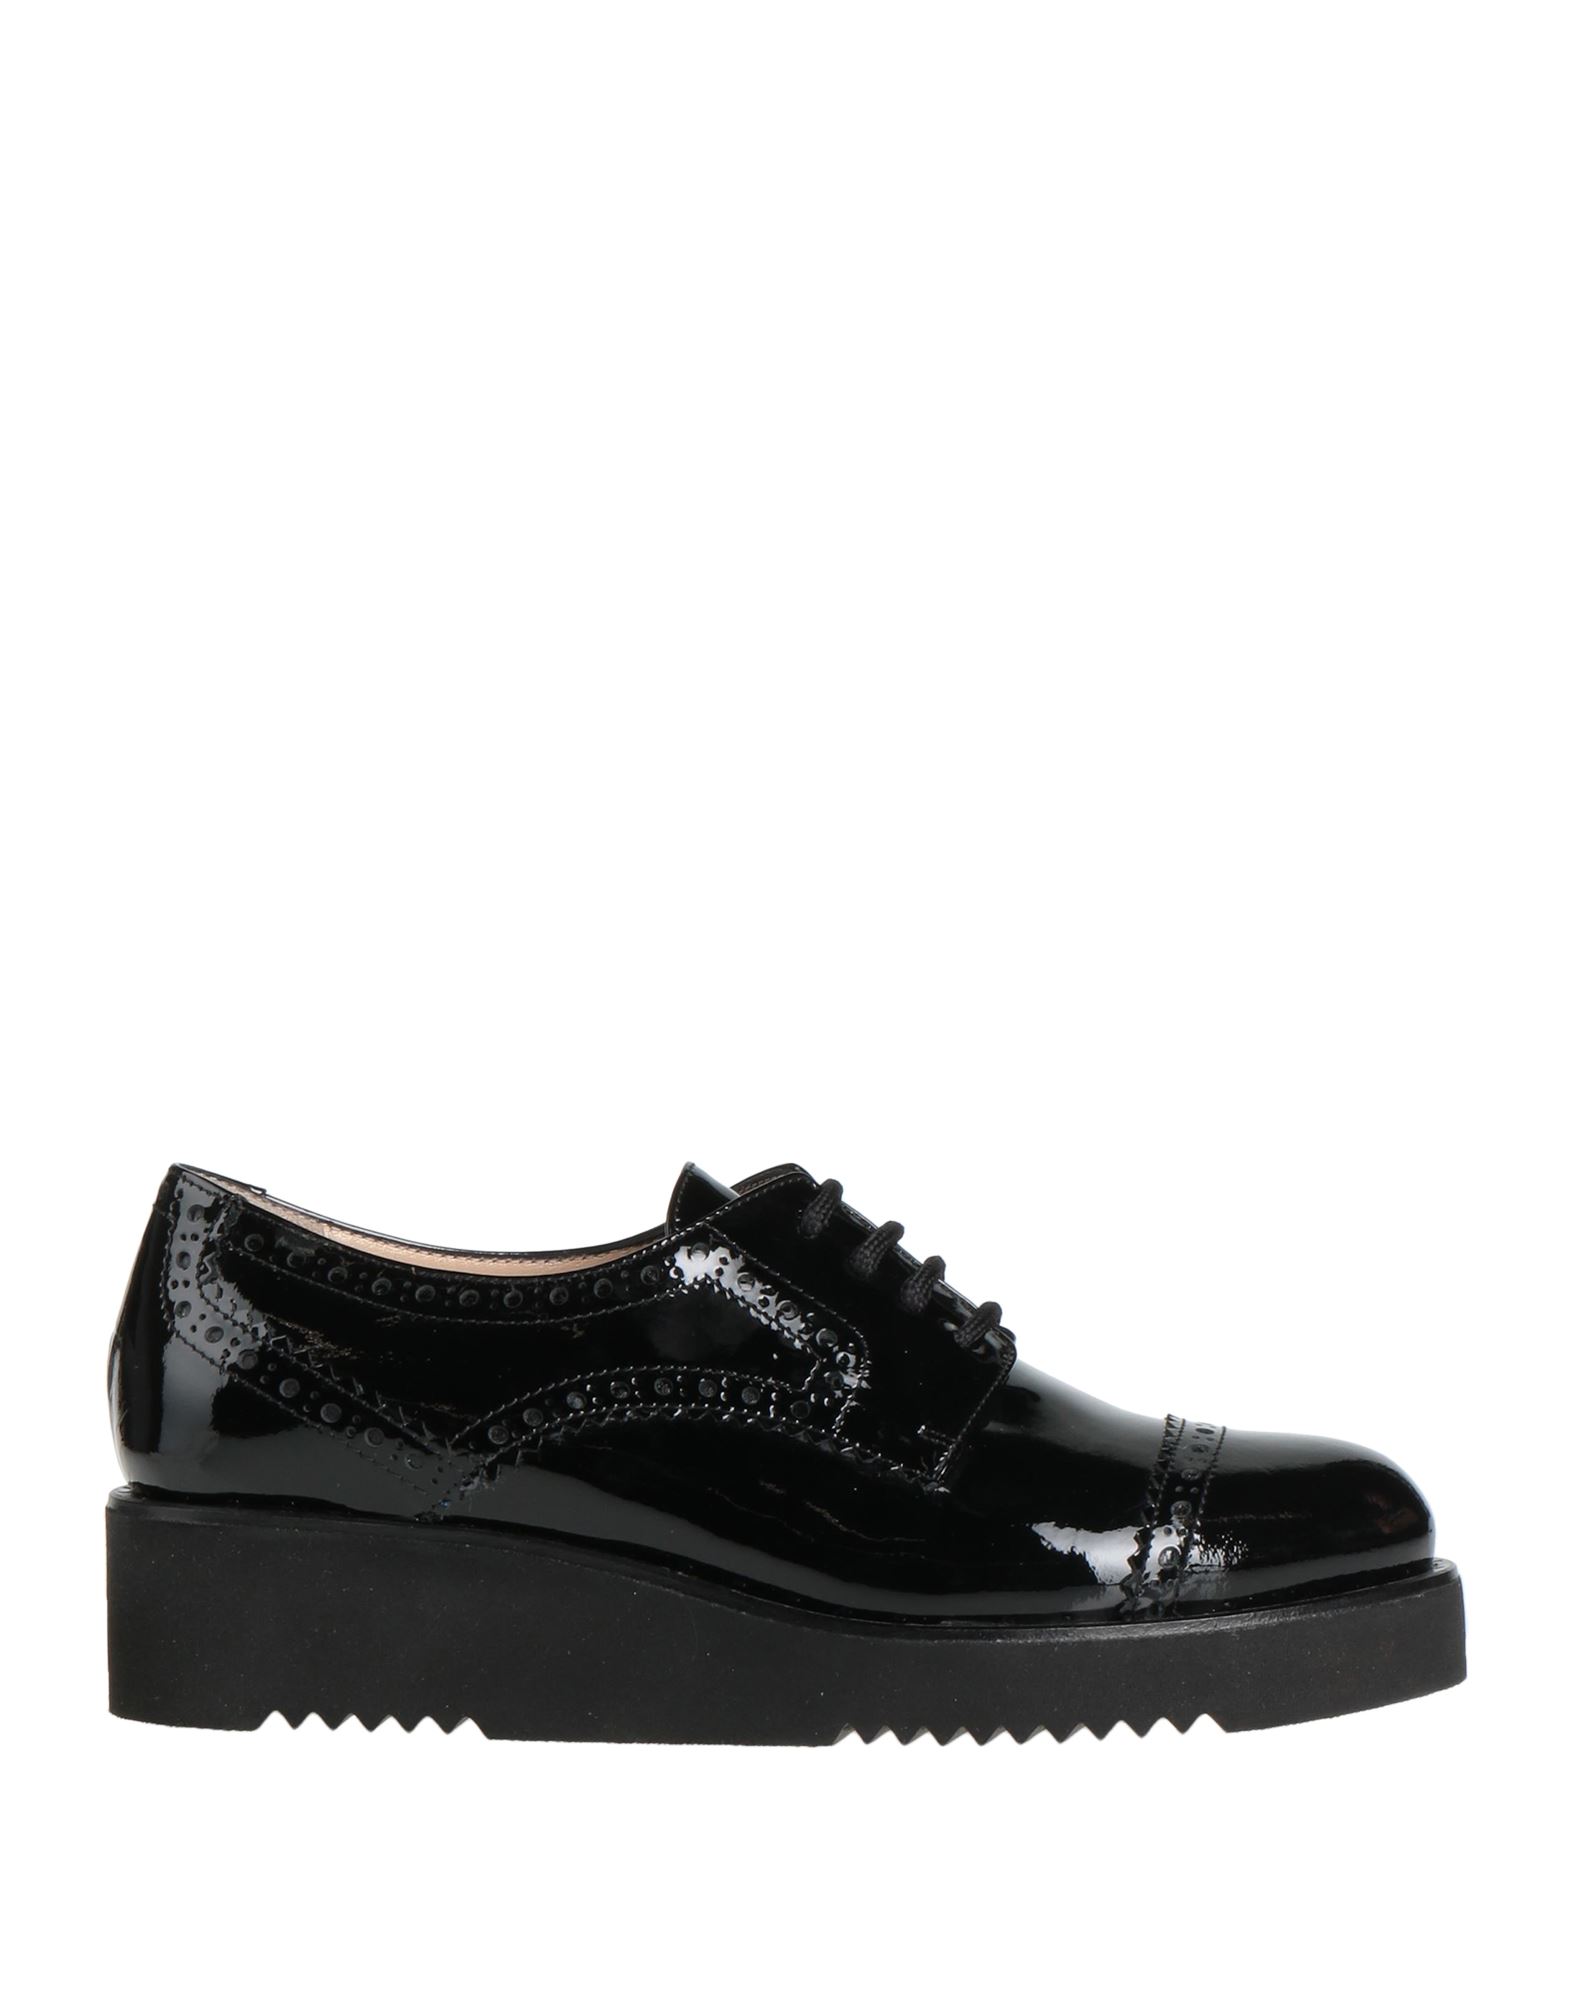 Flaviano Ercoli® Lace-up Shoes In Black